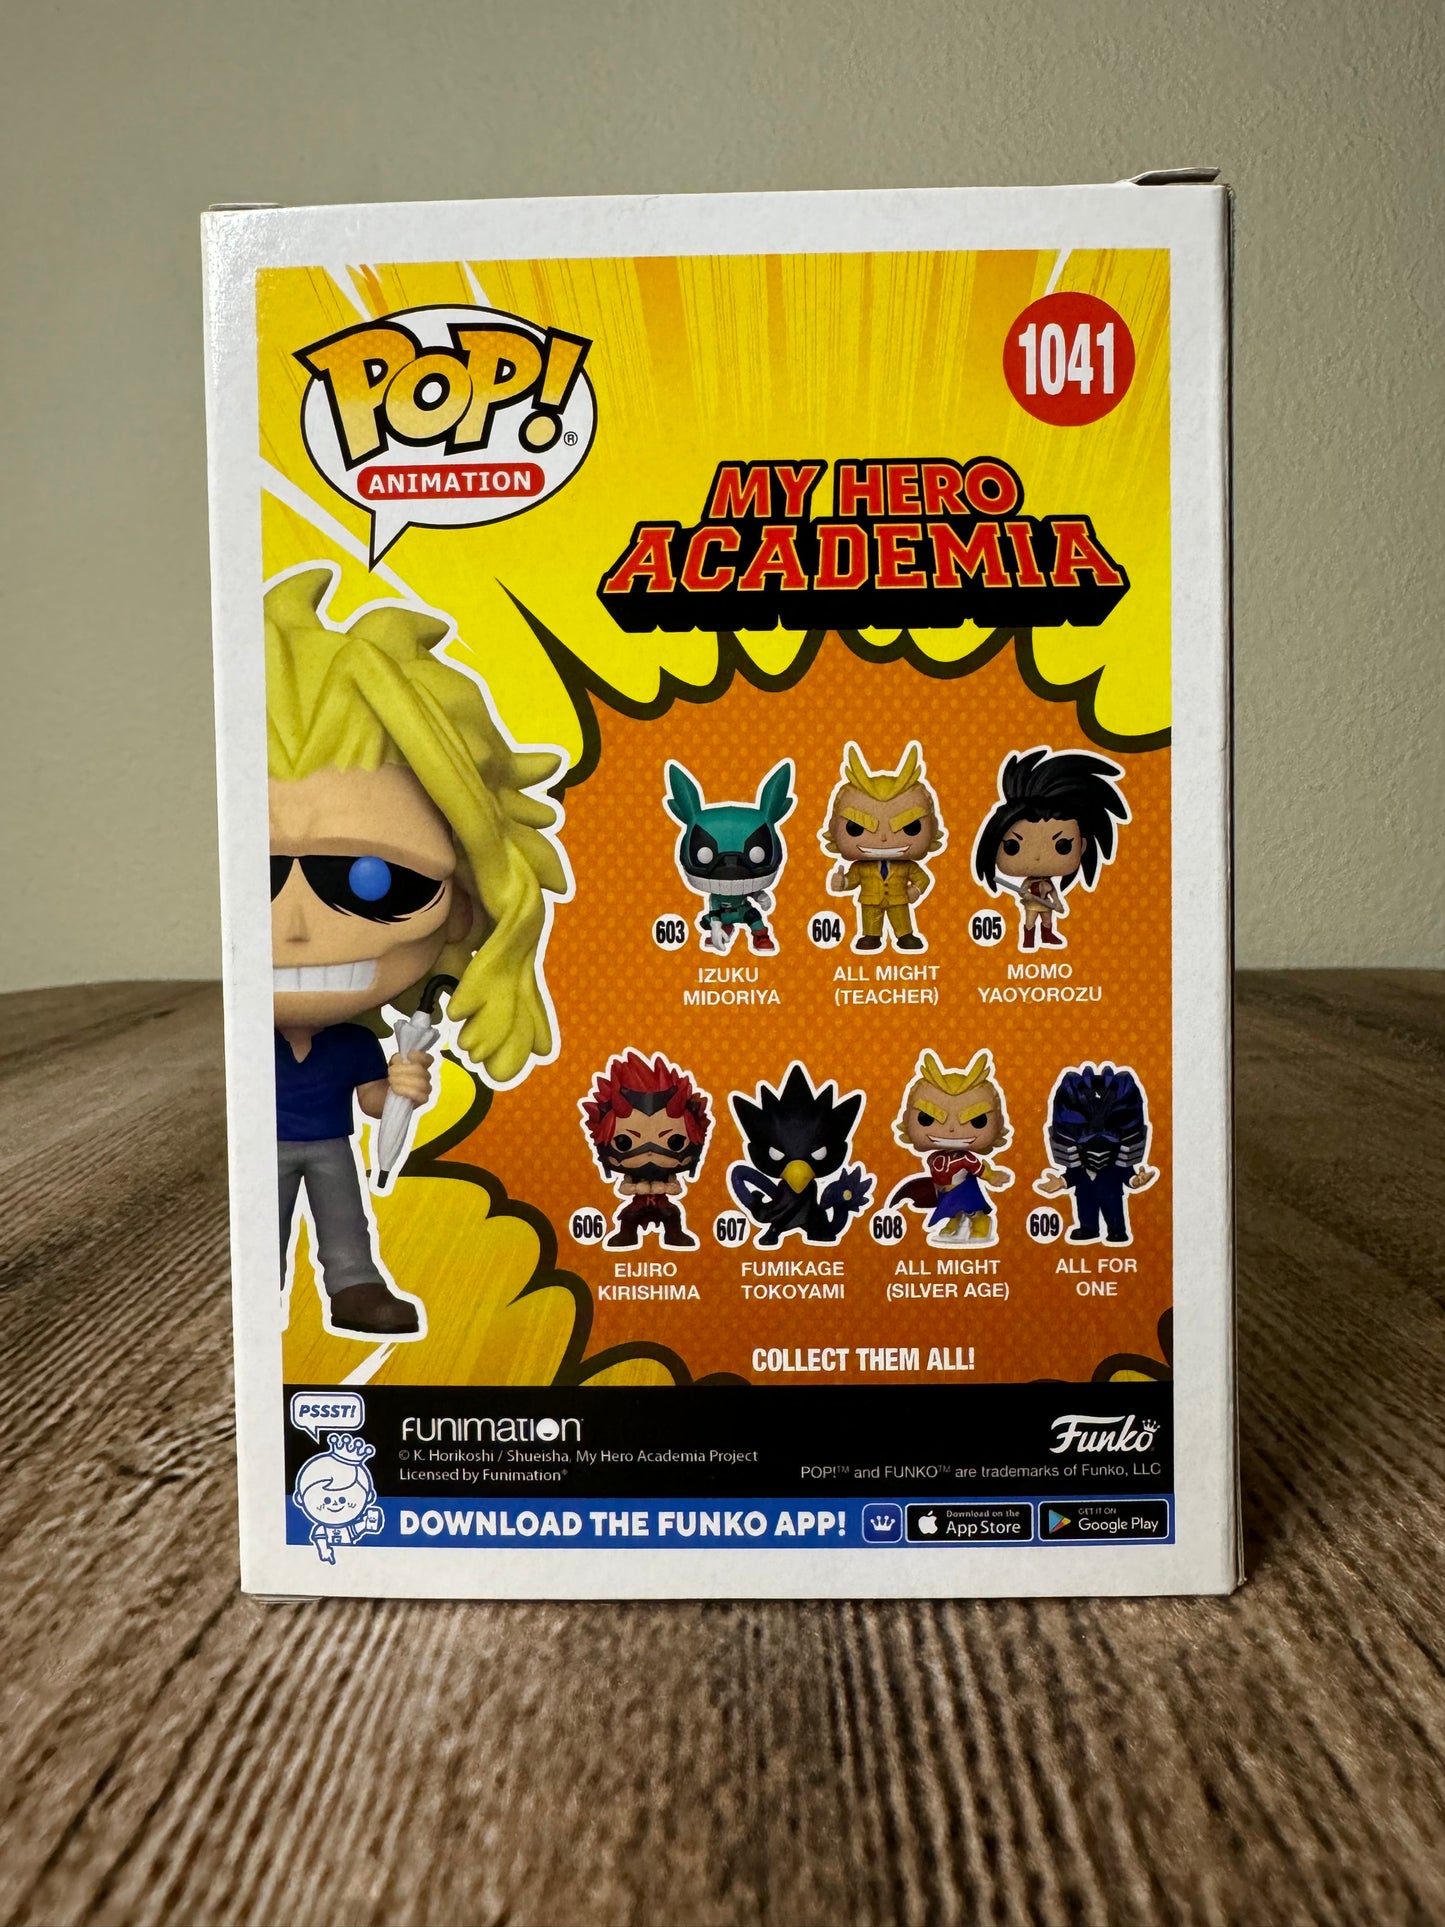 All Might: 2021 Fall Convention Exclusive Funko Pop